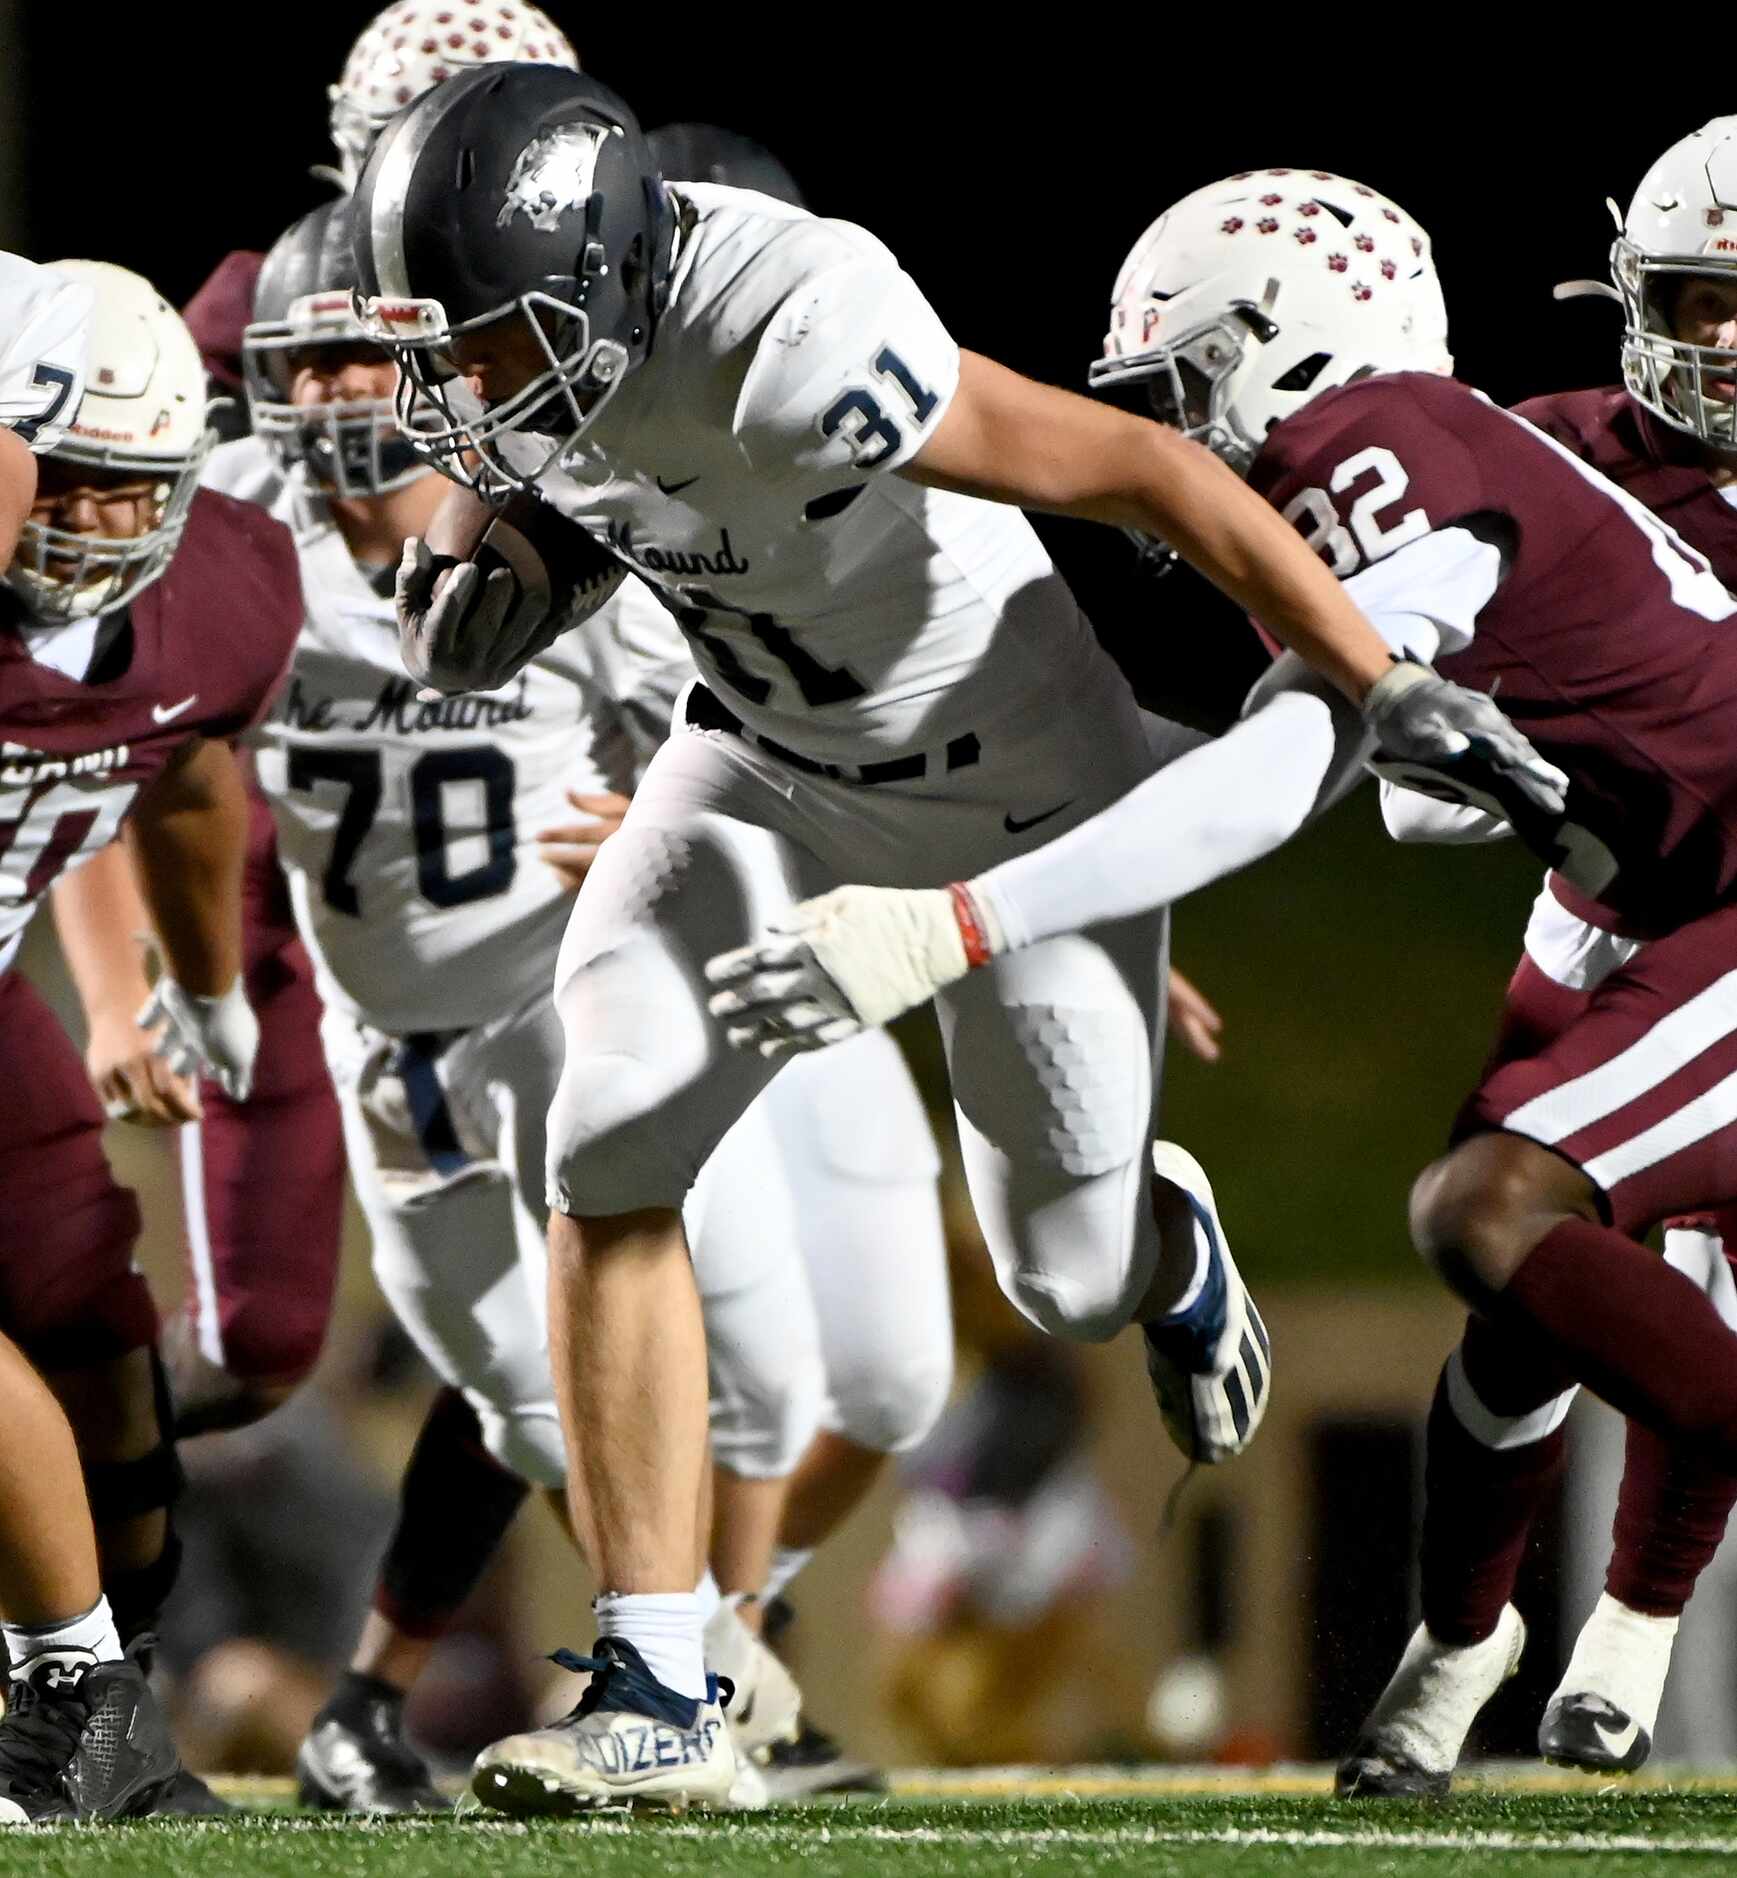 Flower Mound's running back Peyton Porter (31) tries to break a tackle by Plano's Jaxon Lee...